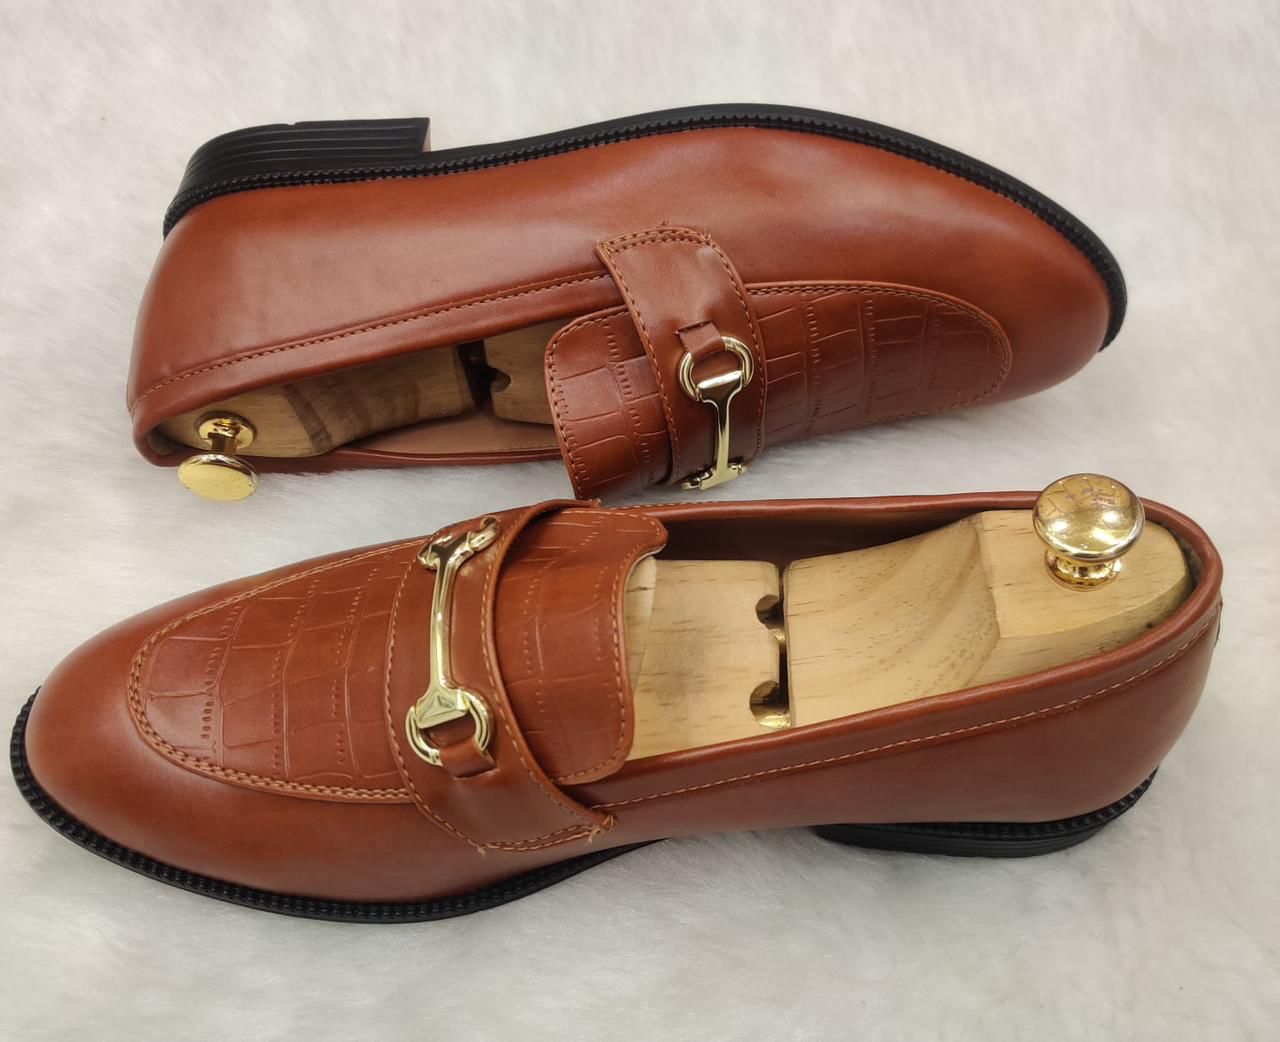 Premium Quality Handmade TPR Sole Casual and Formal Loafers-UniqueandClassy